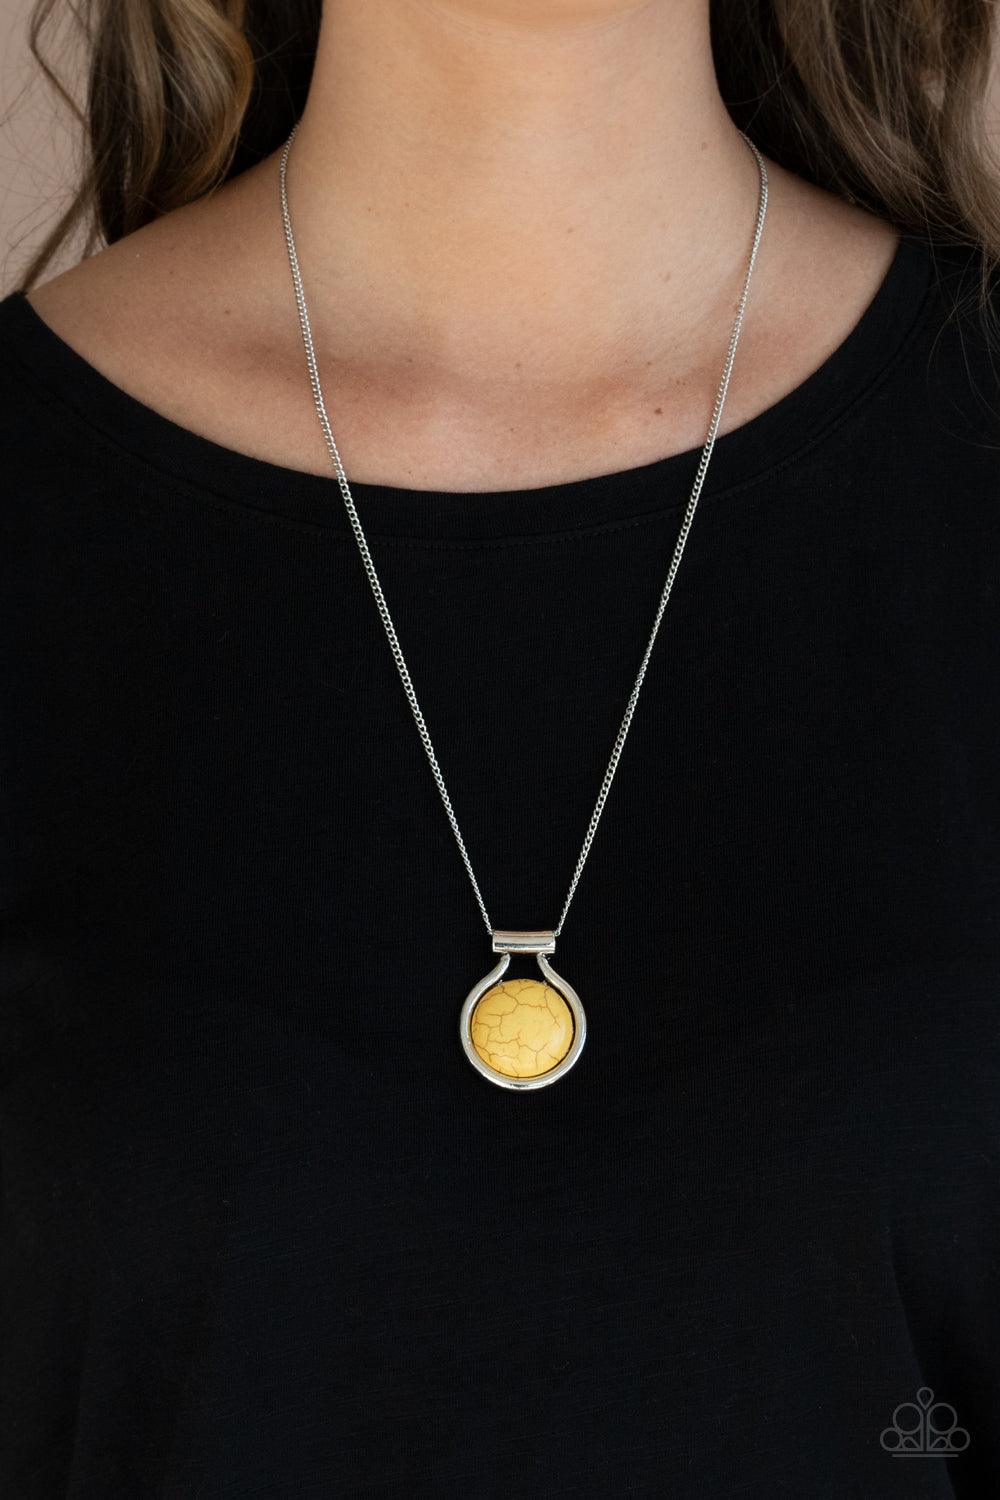 Patagonian Paradise Yellow Necklace - Jewelry by Bretta